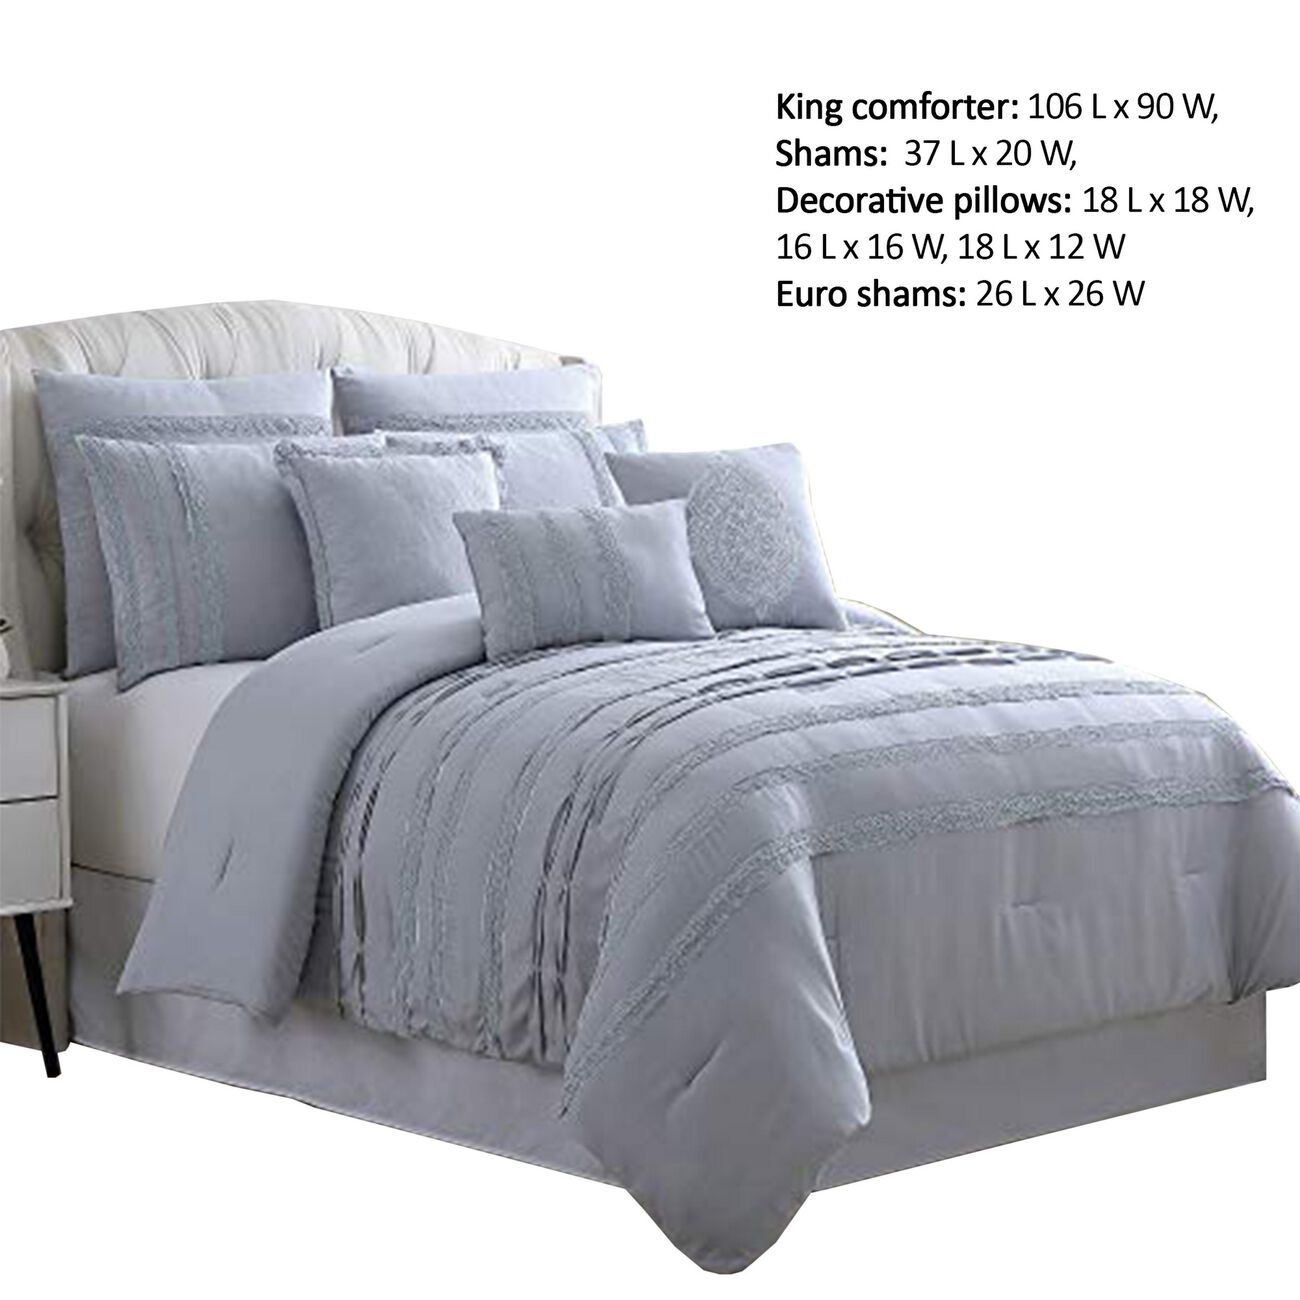 Assisi 8 Piece King Comforter Set with Reverse Pleats and Lace The Urban Port, Gray